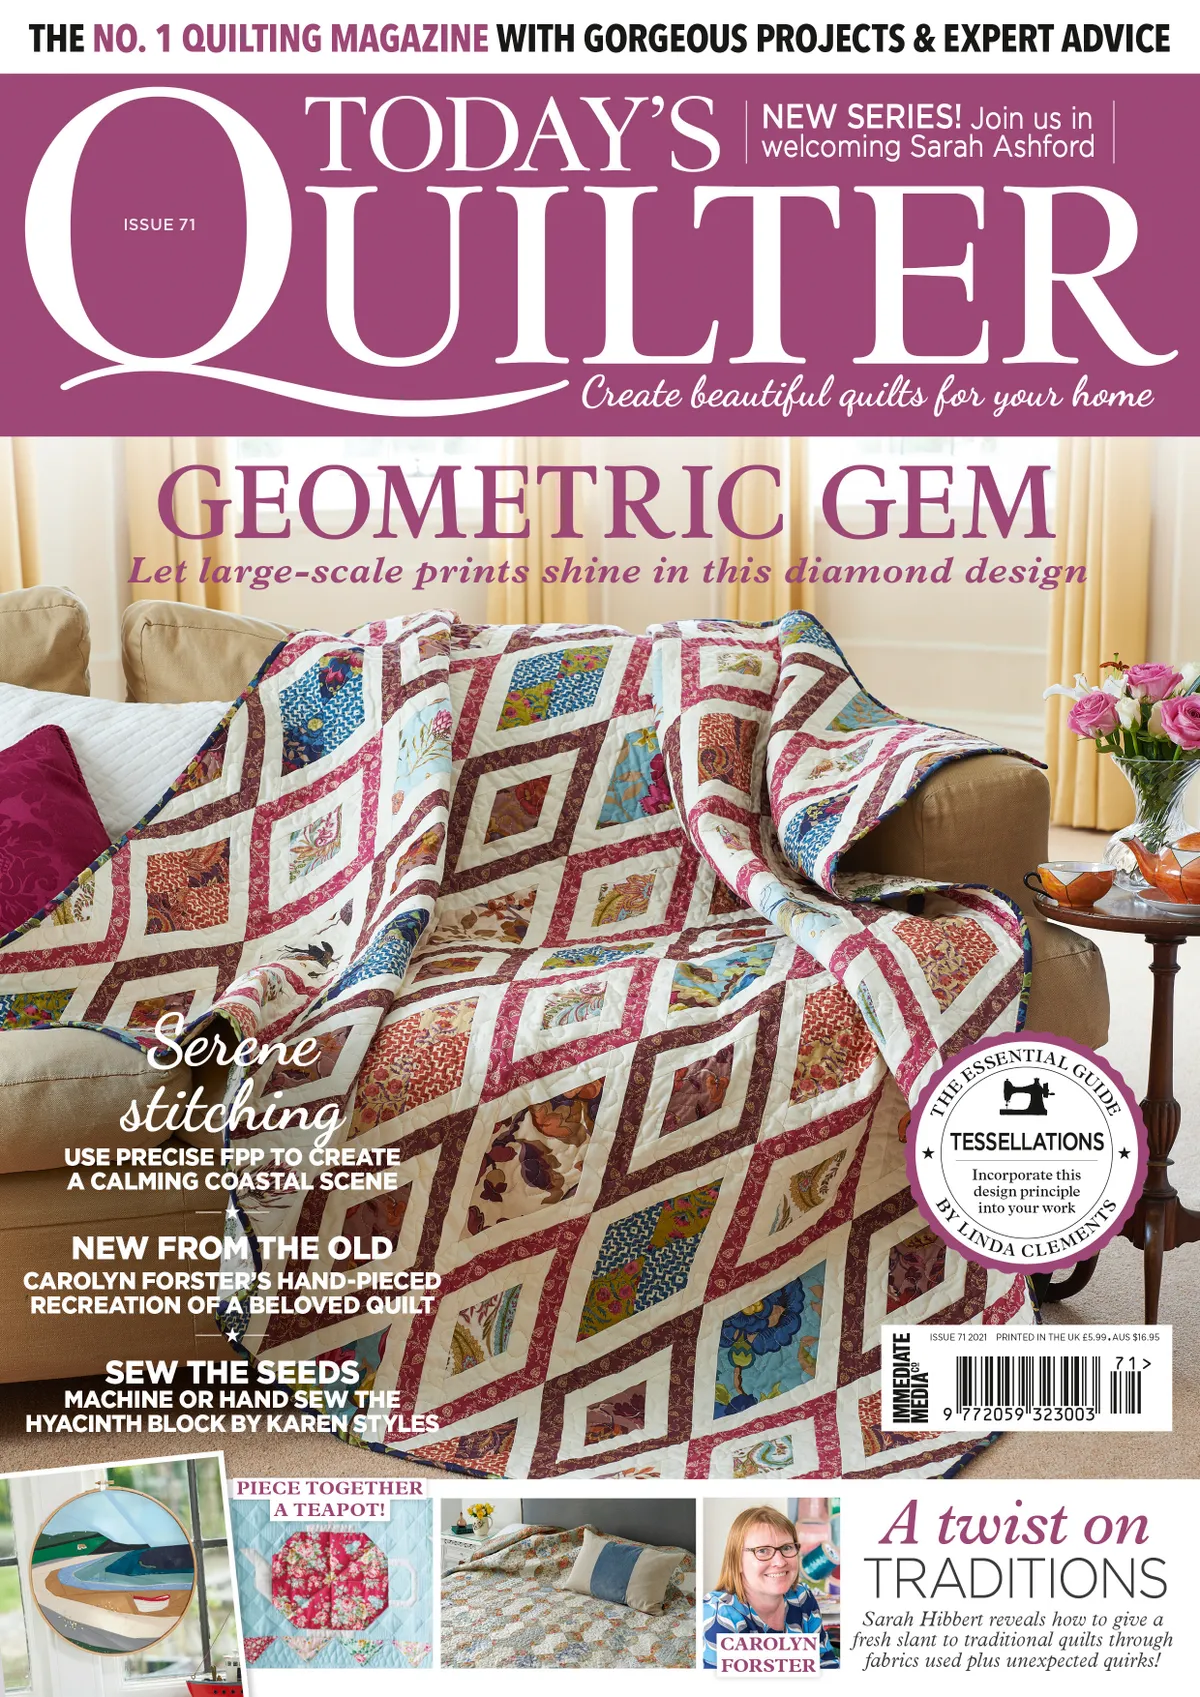 Today's Quilter magazine issue 71